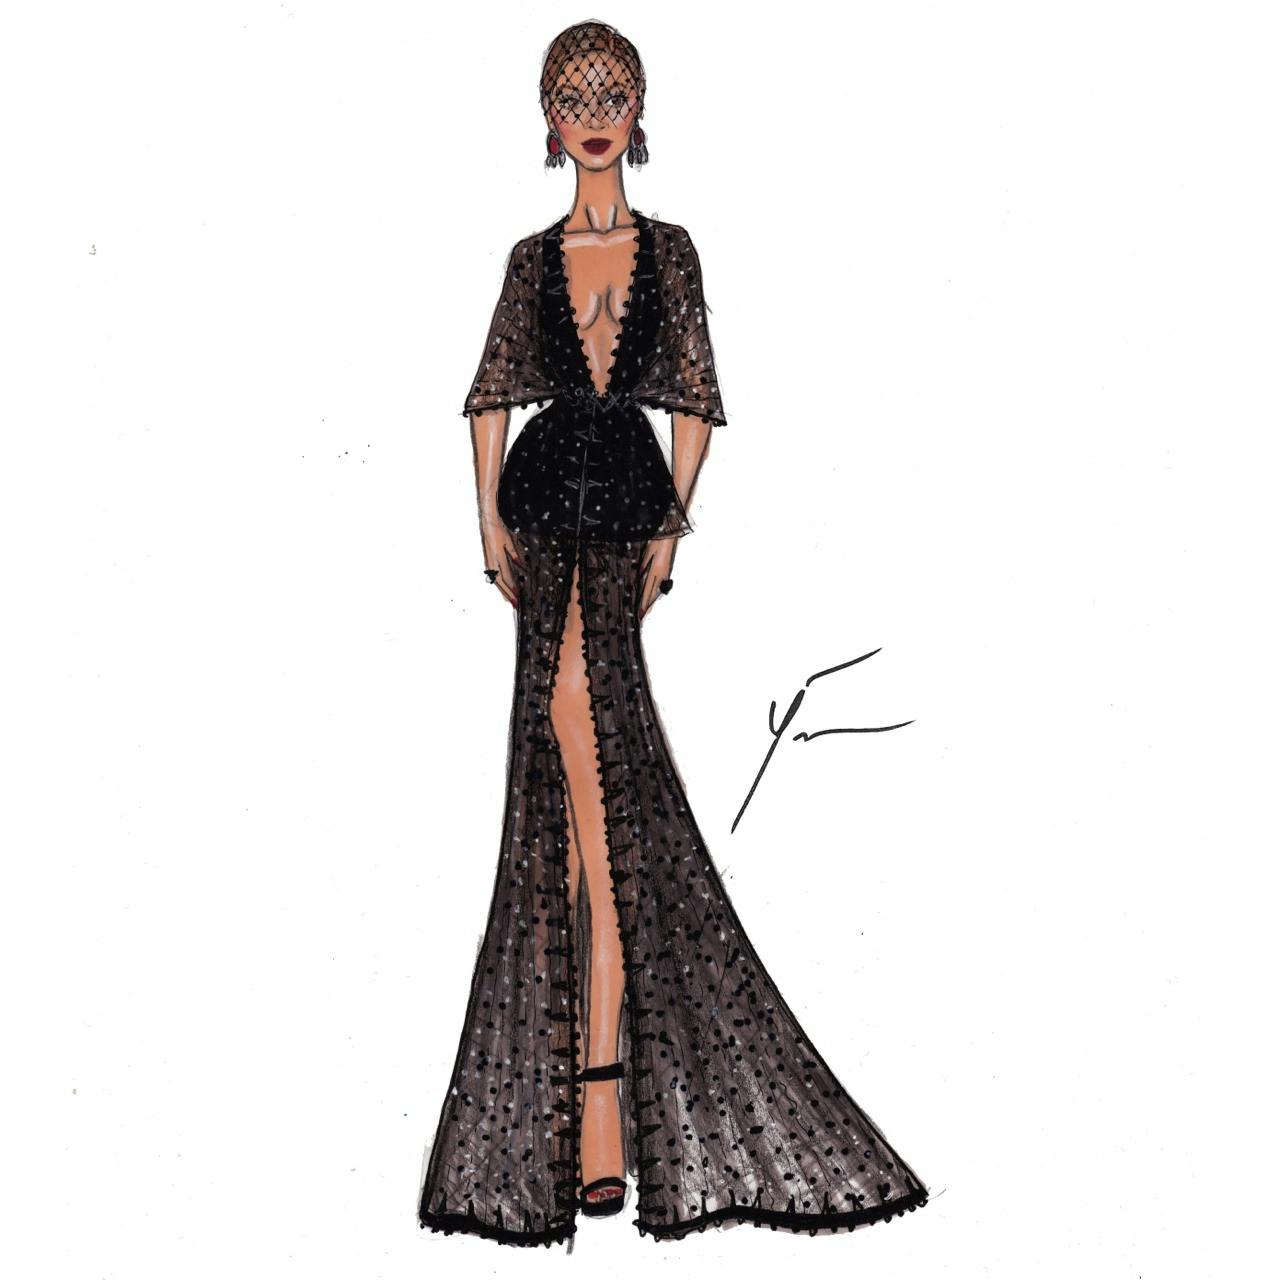 If you thought the Met Gala was gorgeous, check out this Tumblr fan art